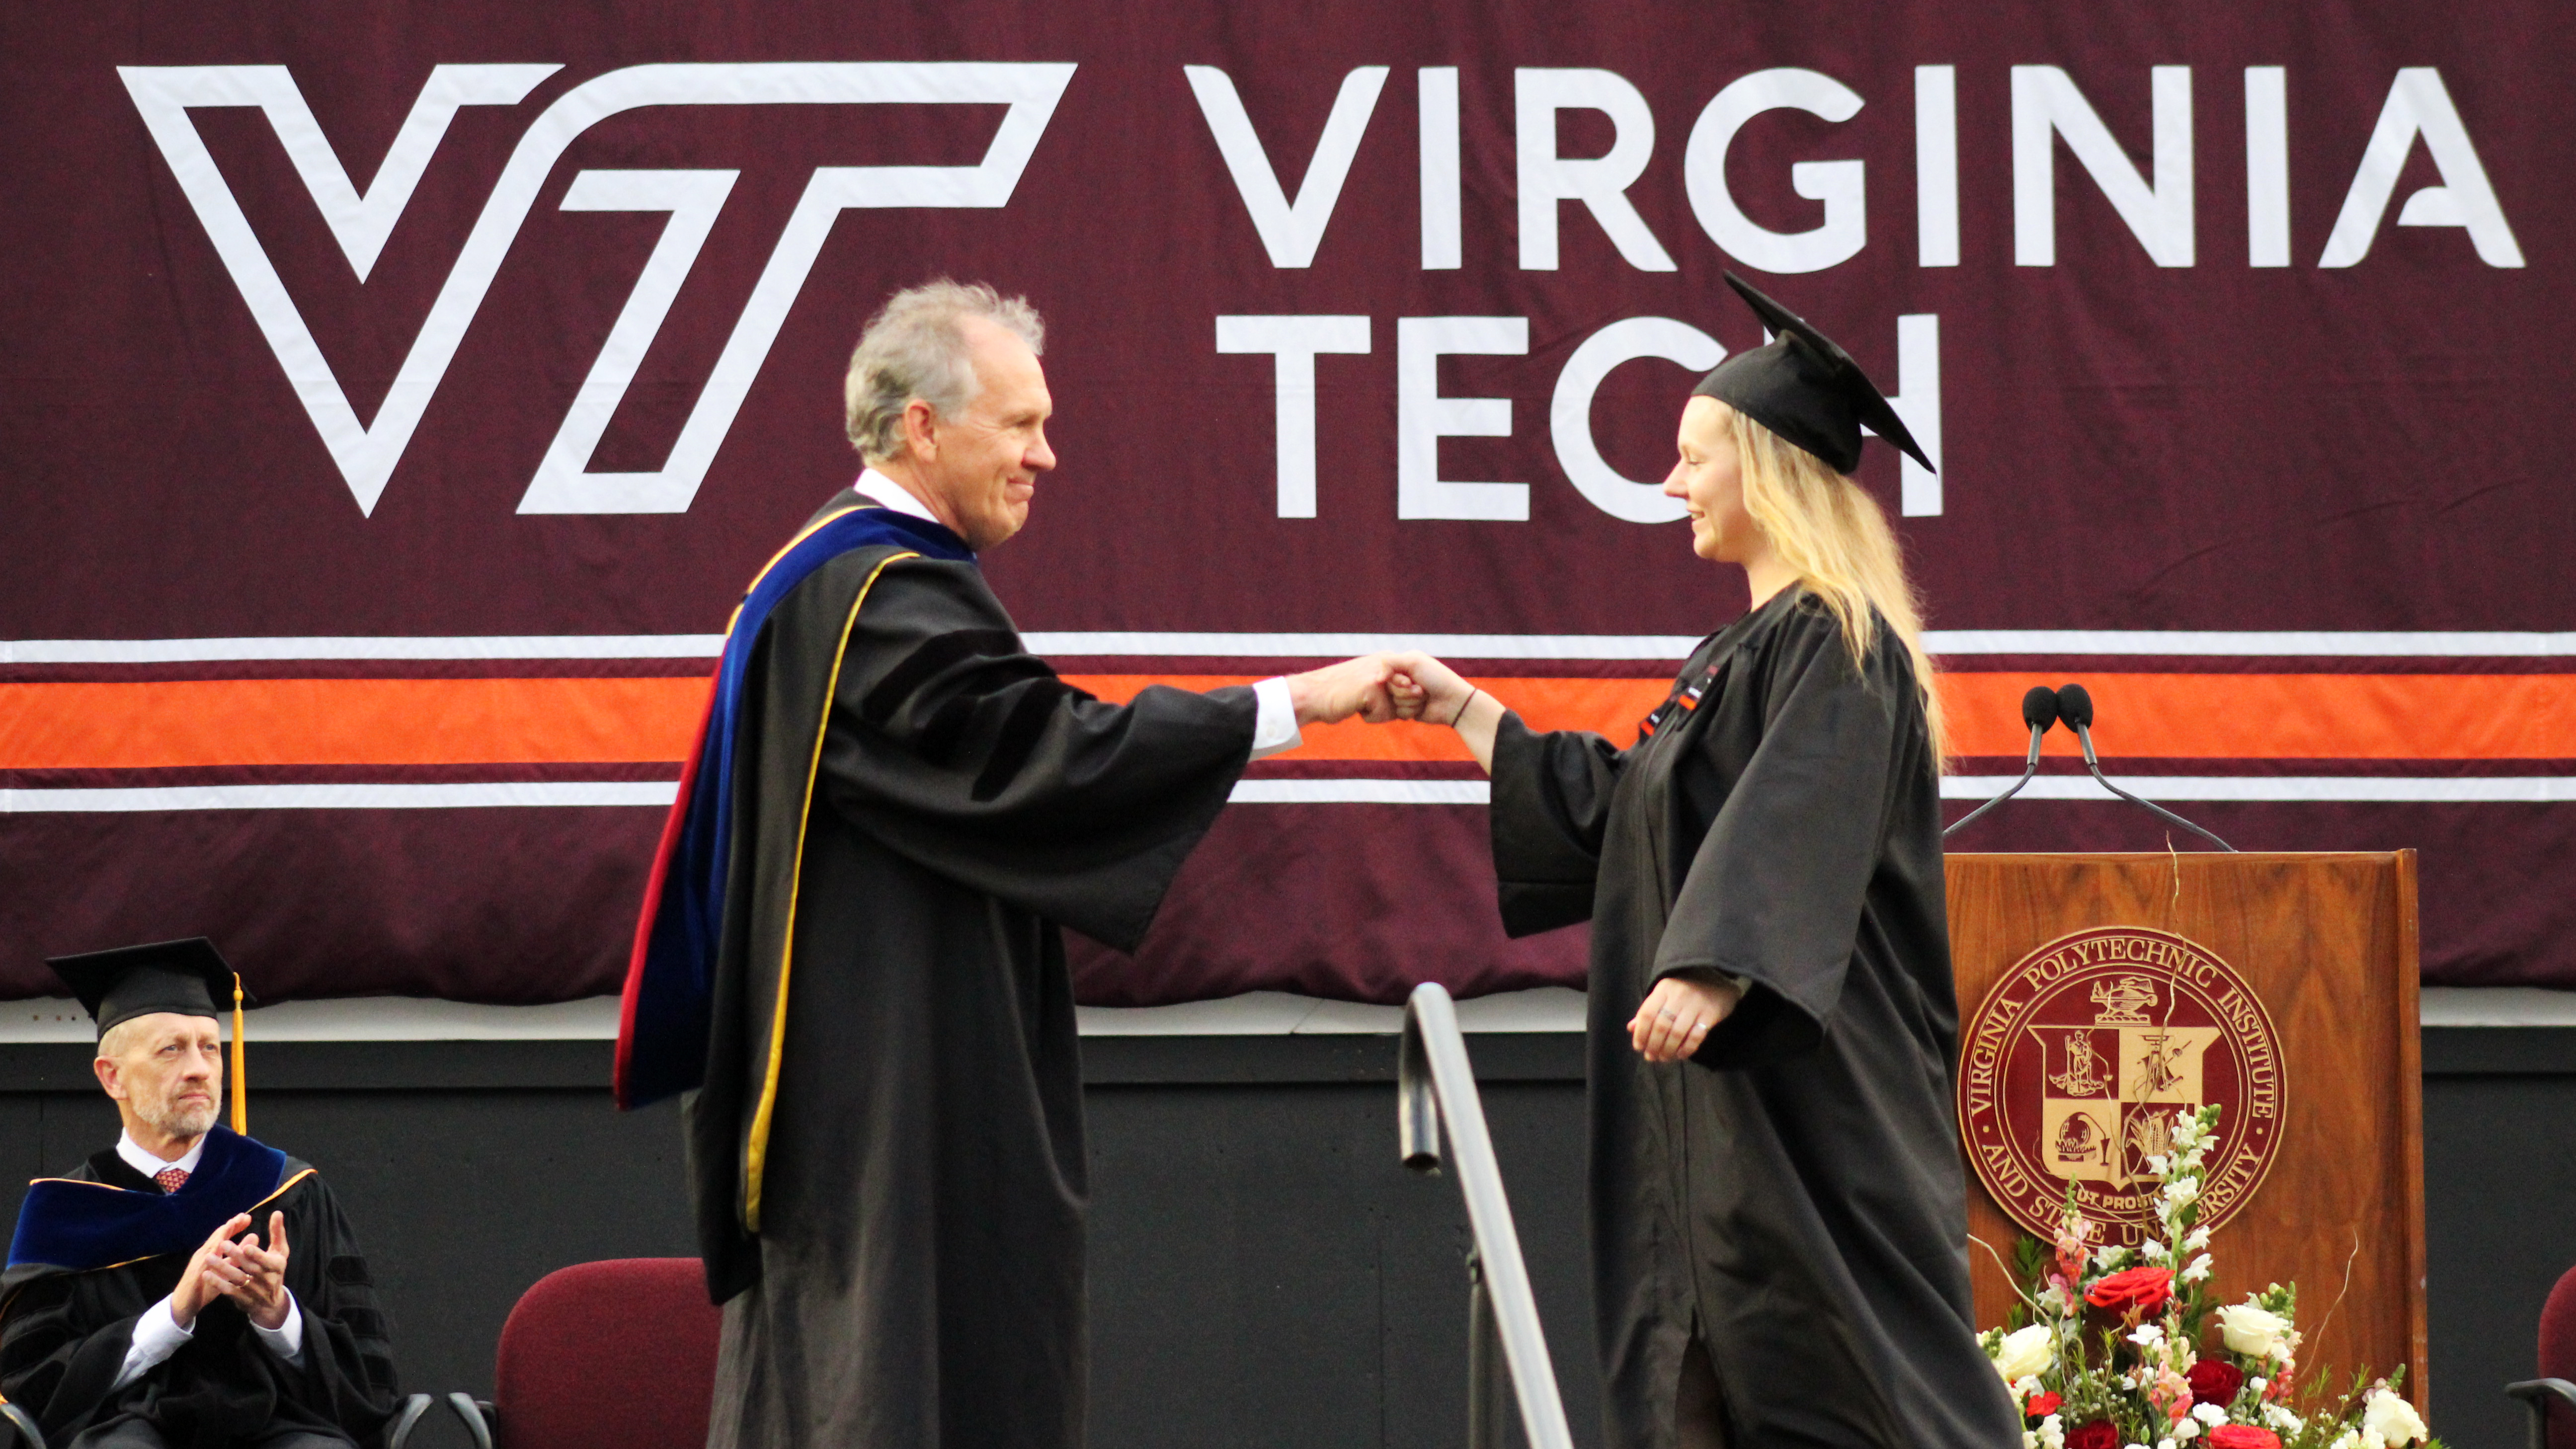 Dean Paul Winistorfer fist bumping a recent graduate on stage at commencement.